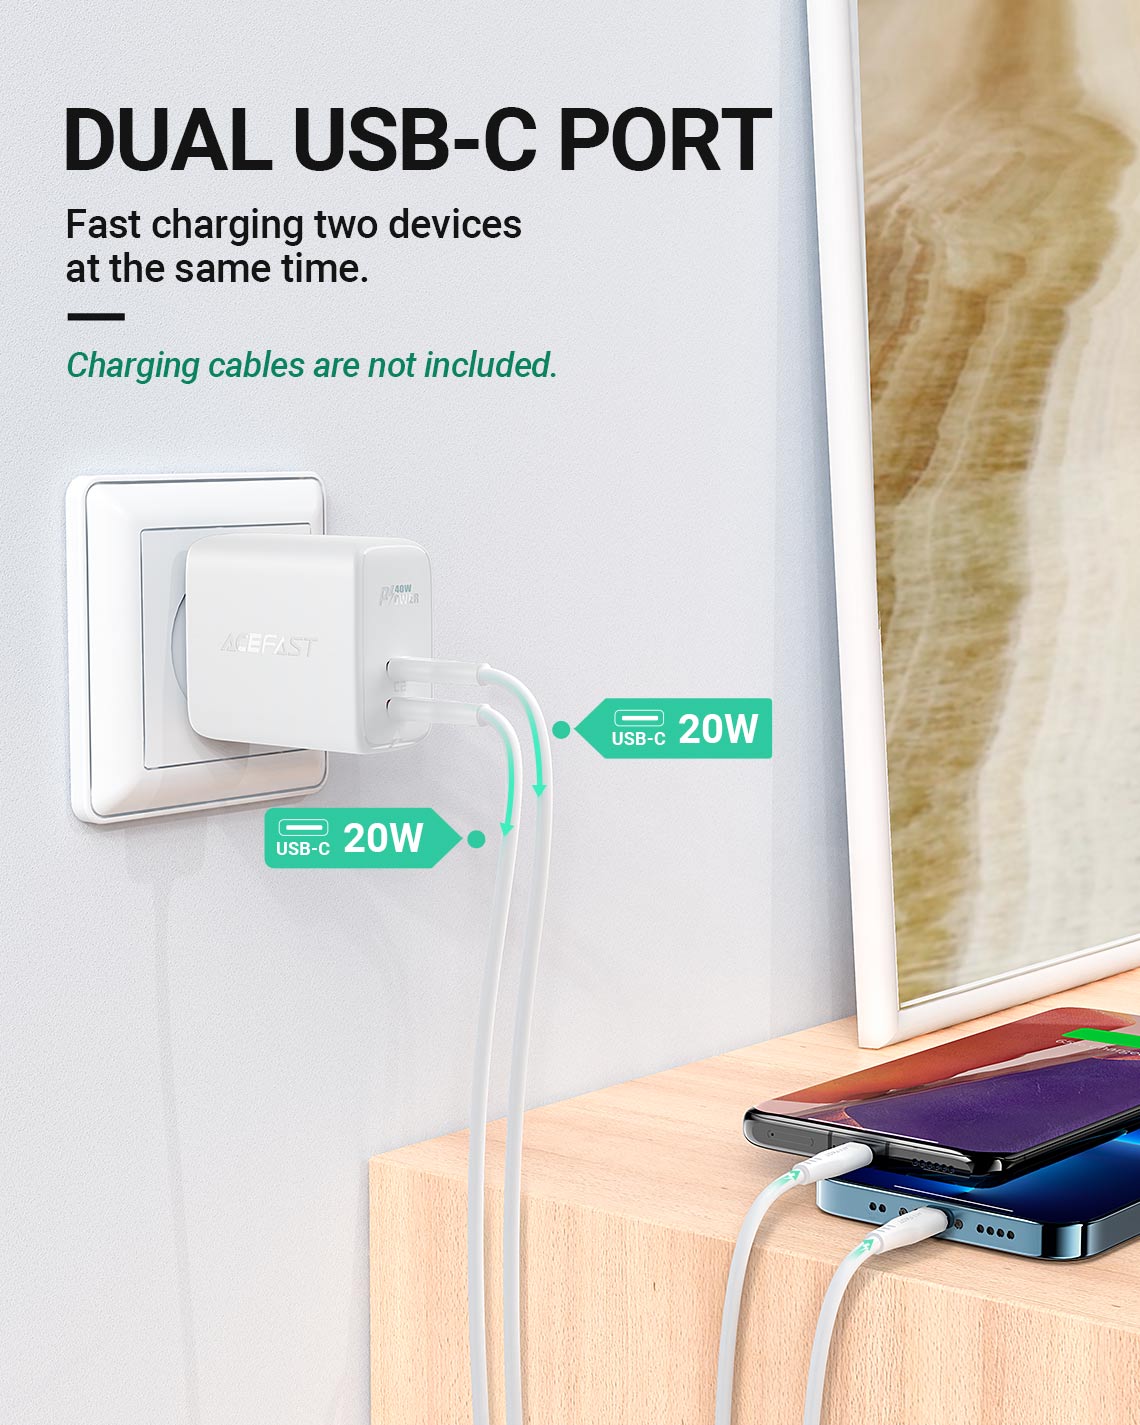 acefast a11 wall charger charging two devices